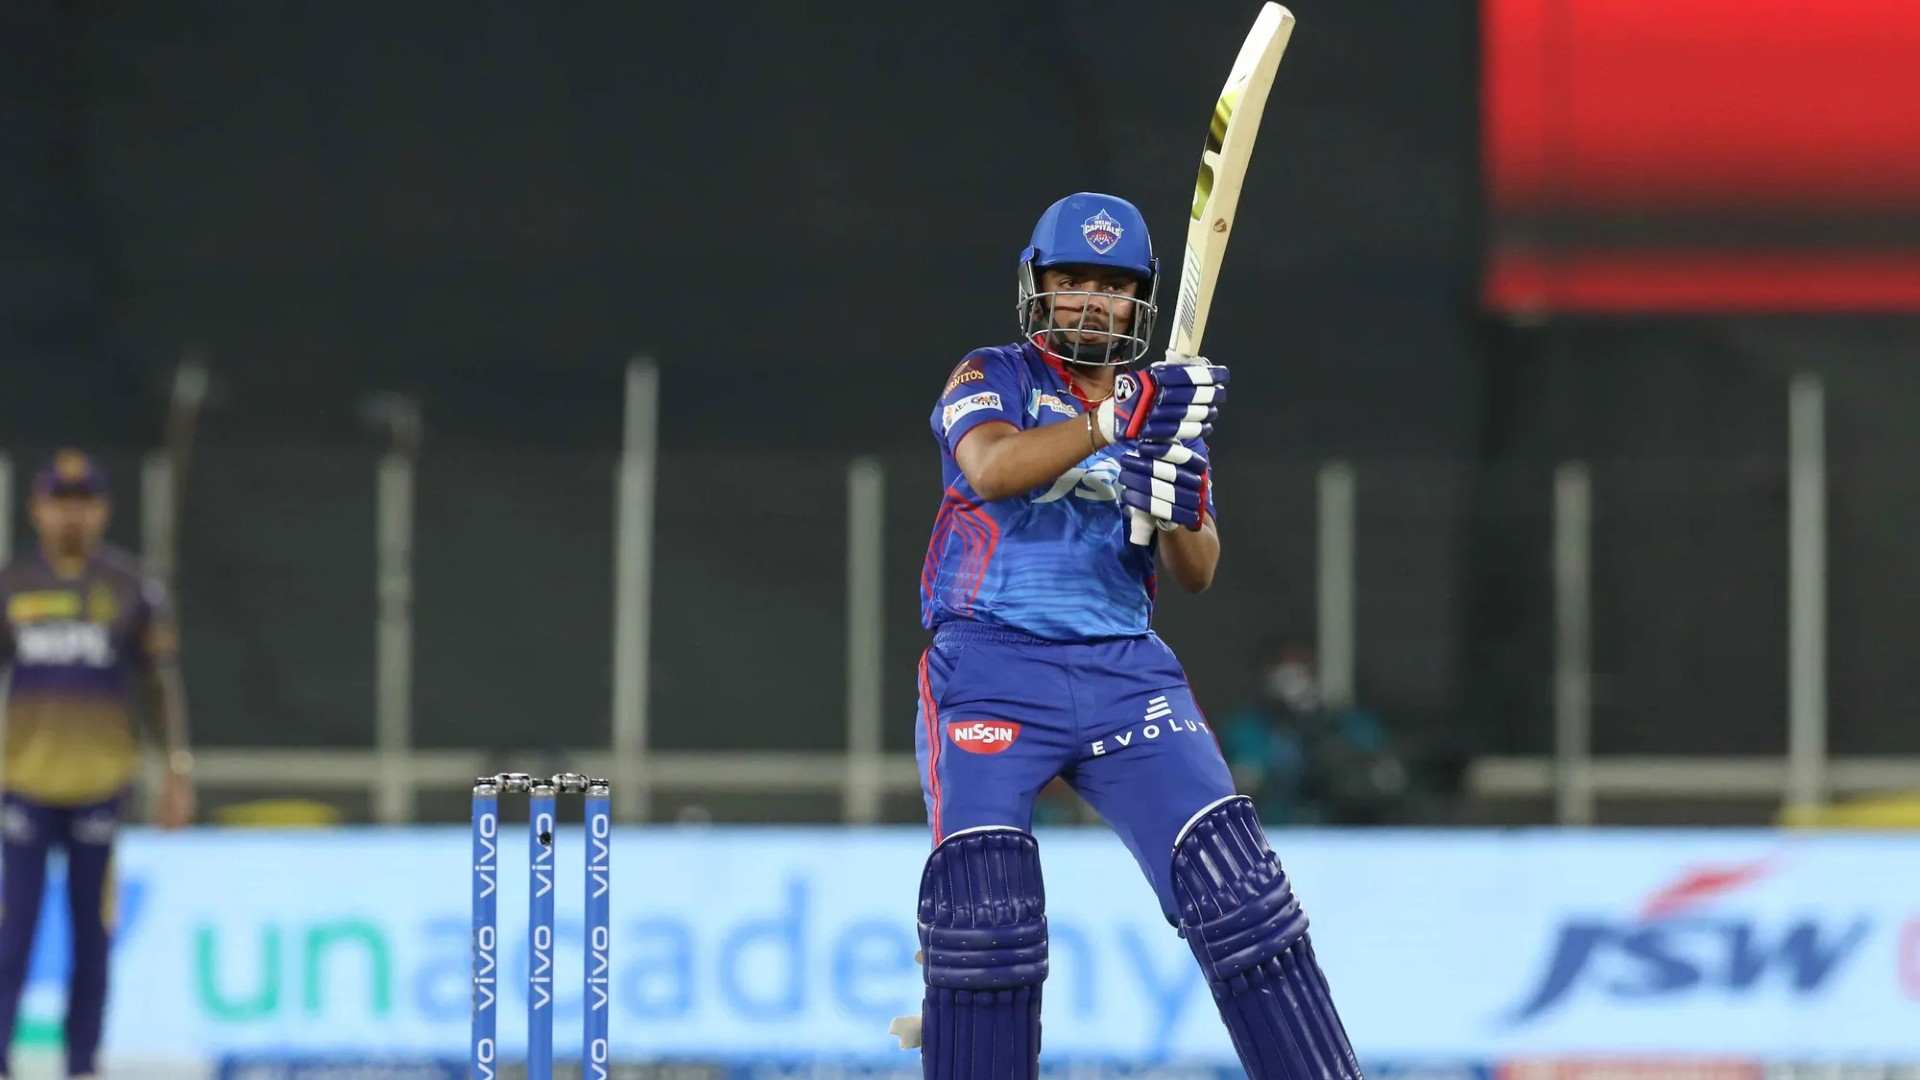 Prithvi Shaw smashed the ball to all corners of the ground. (Image Credit: Twitter/@IPL)